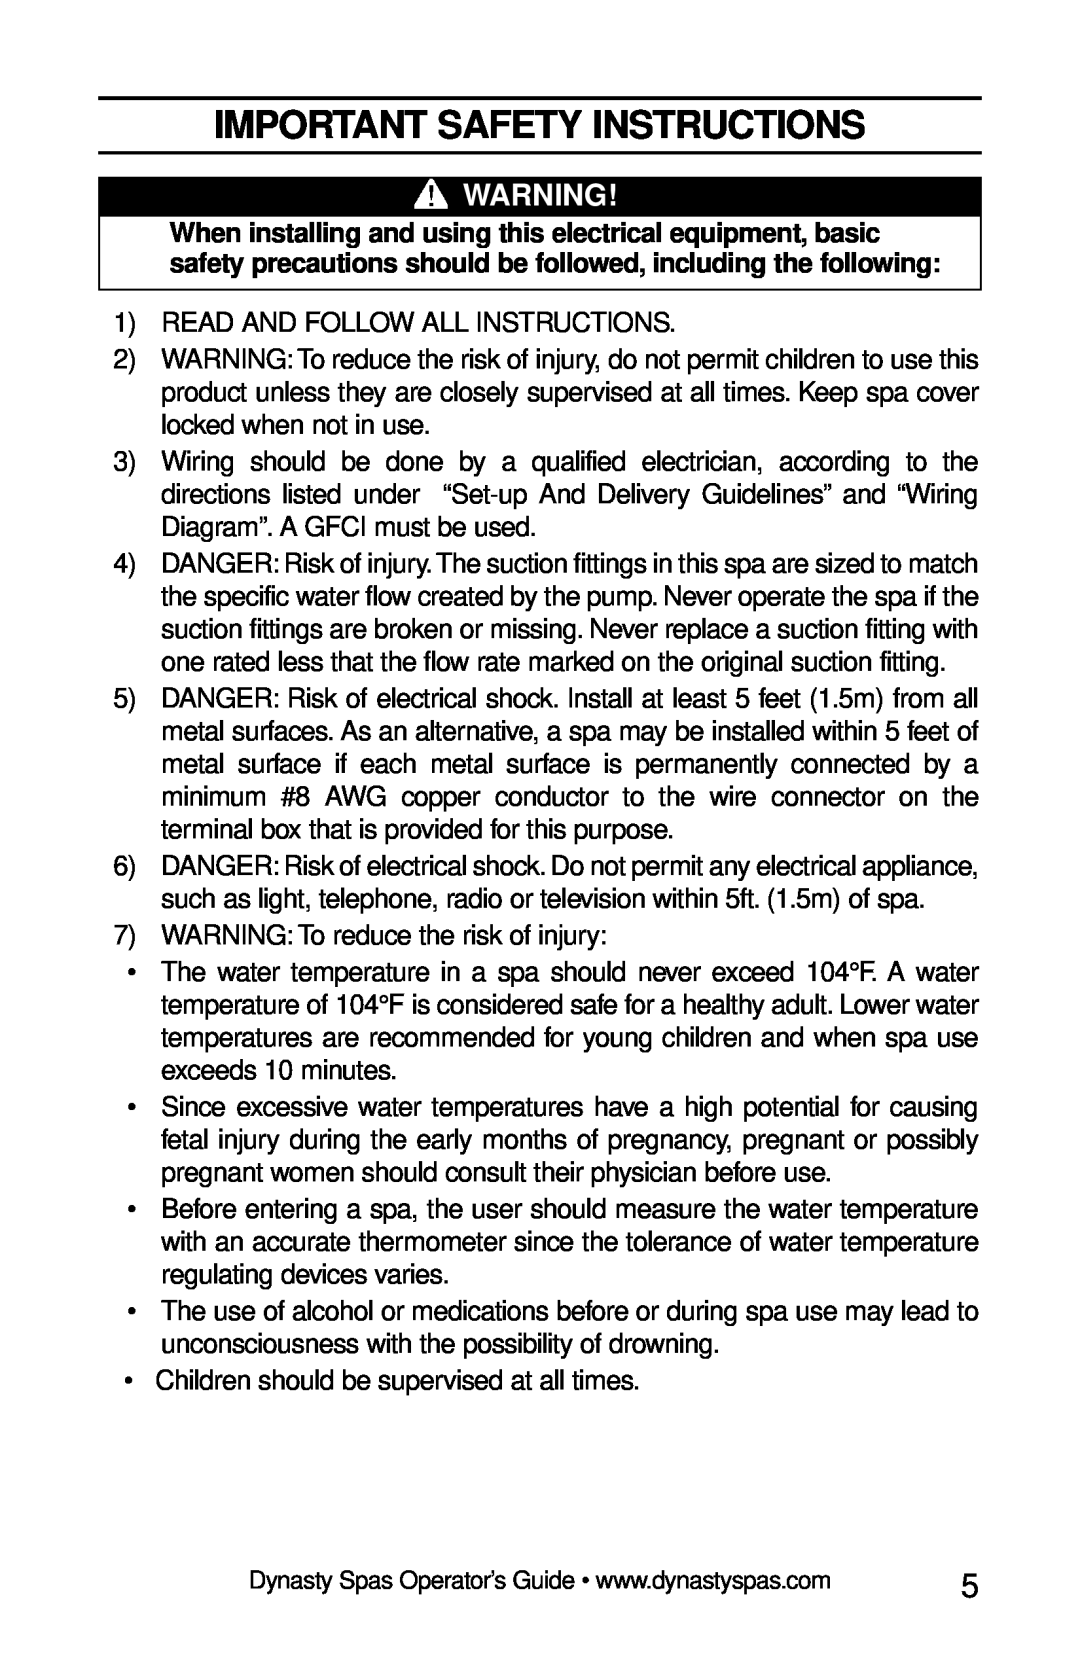 Dynasty Spas 2007 manual Important Safety Instructions 